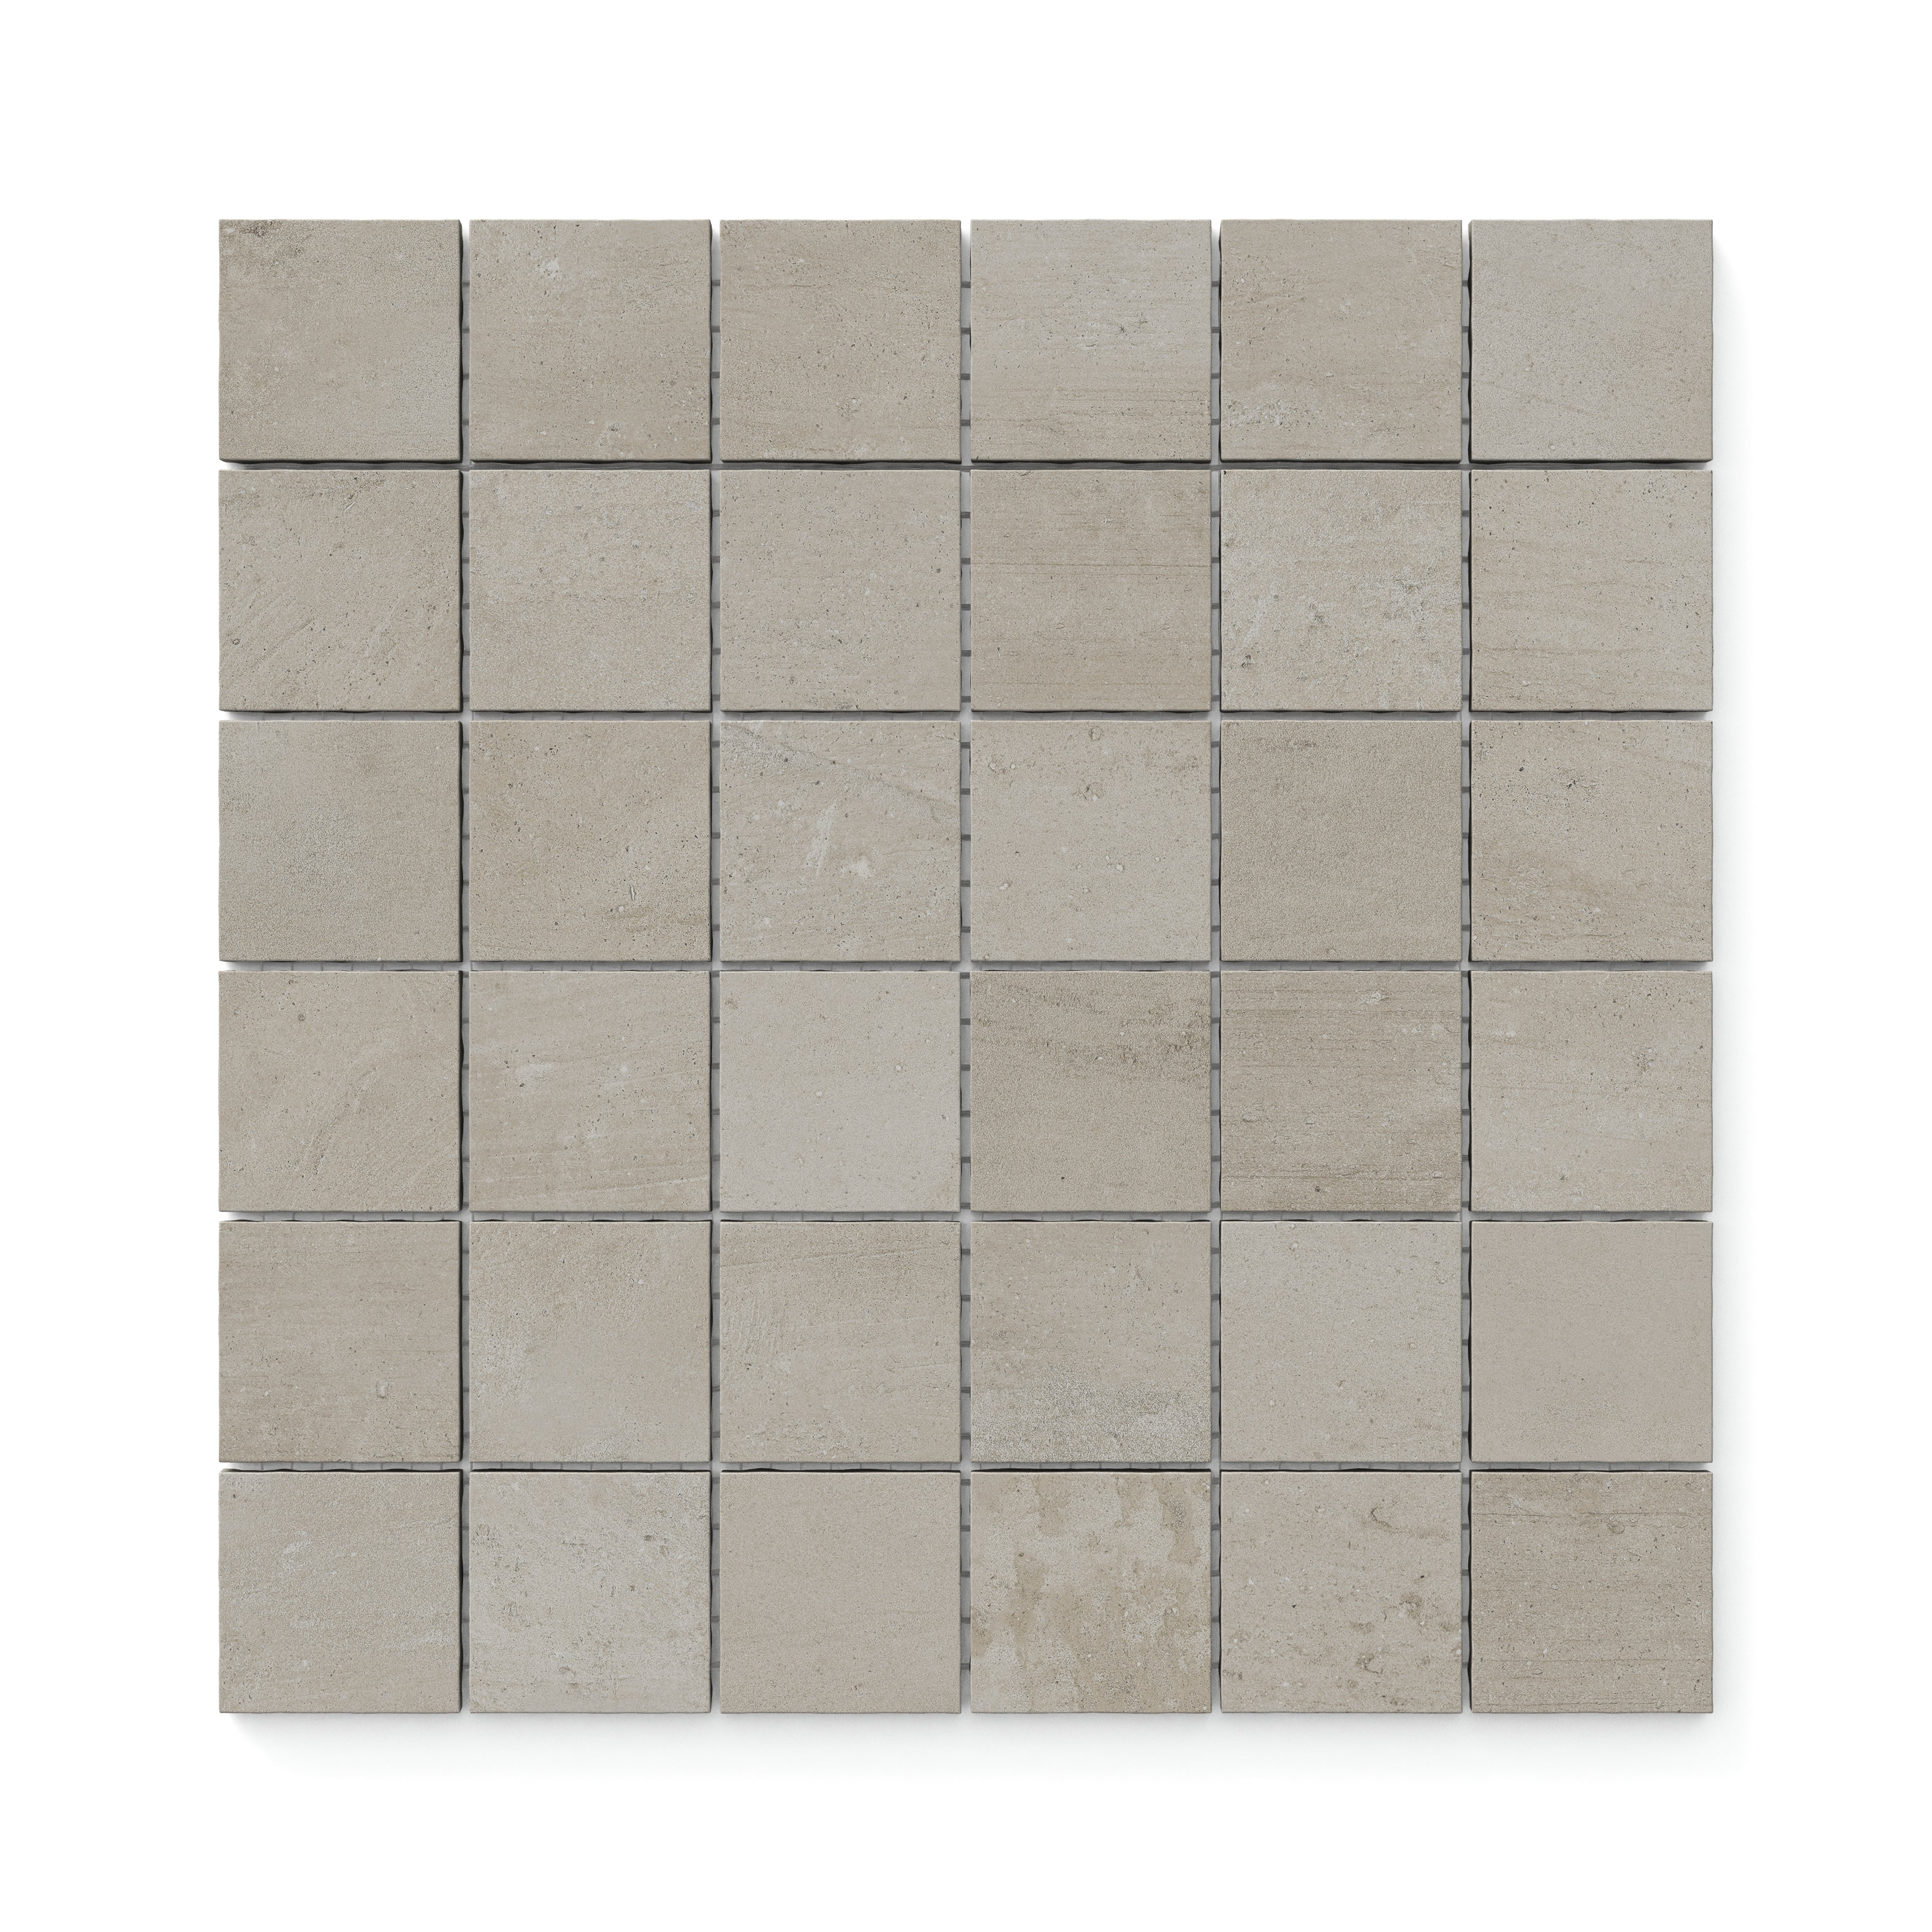 Ramsey 2x2 Matte Porcelain Mosaic Tile in Putty